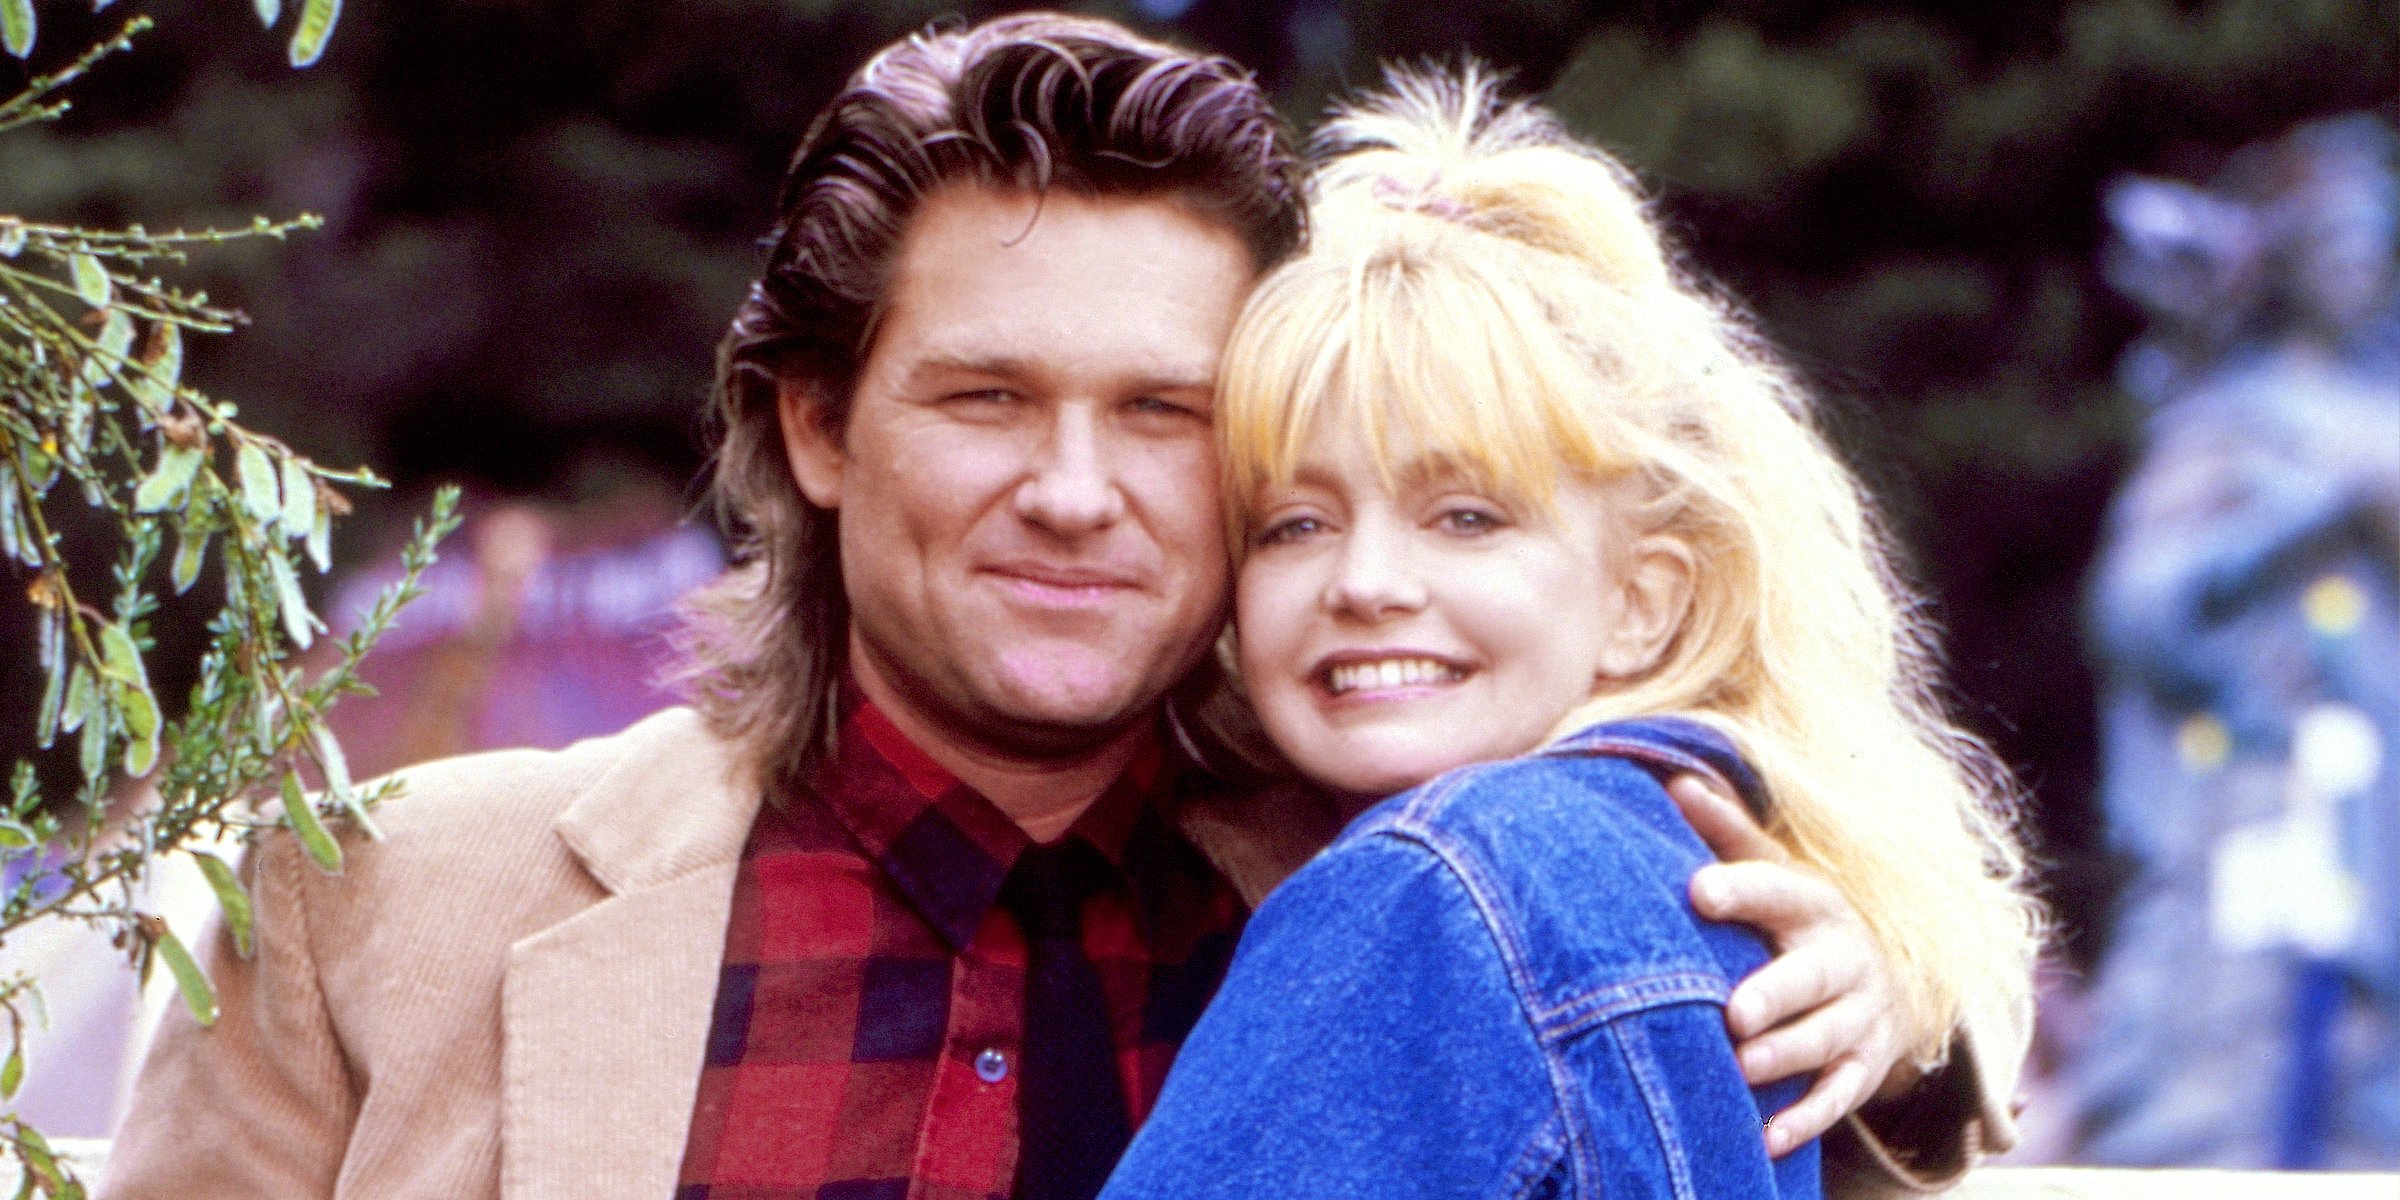 Kurt Russell and Goldie Hawn | Source: Getty Images